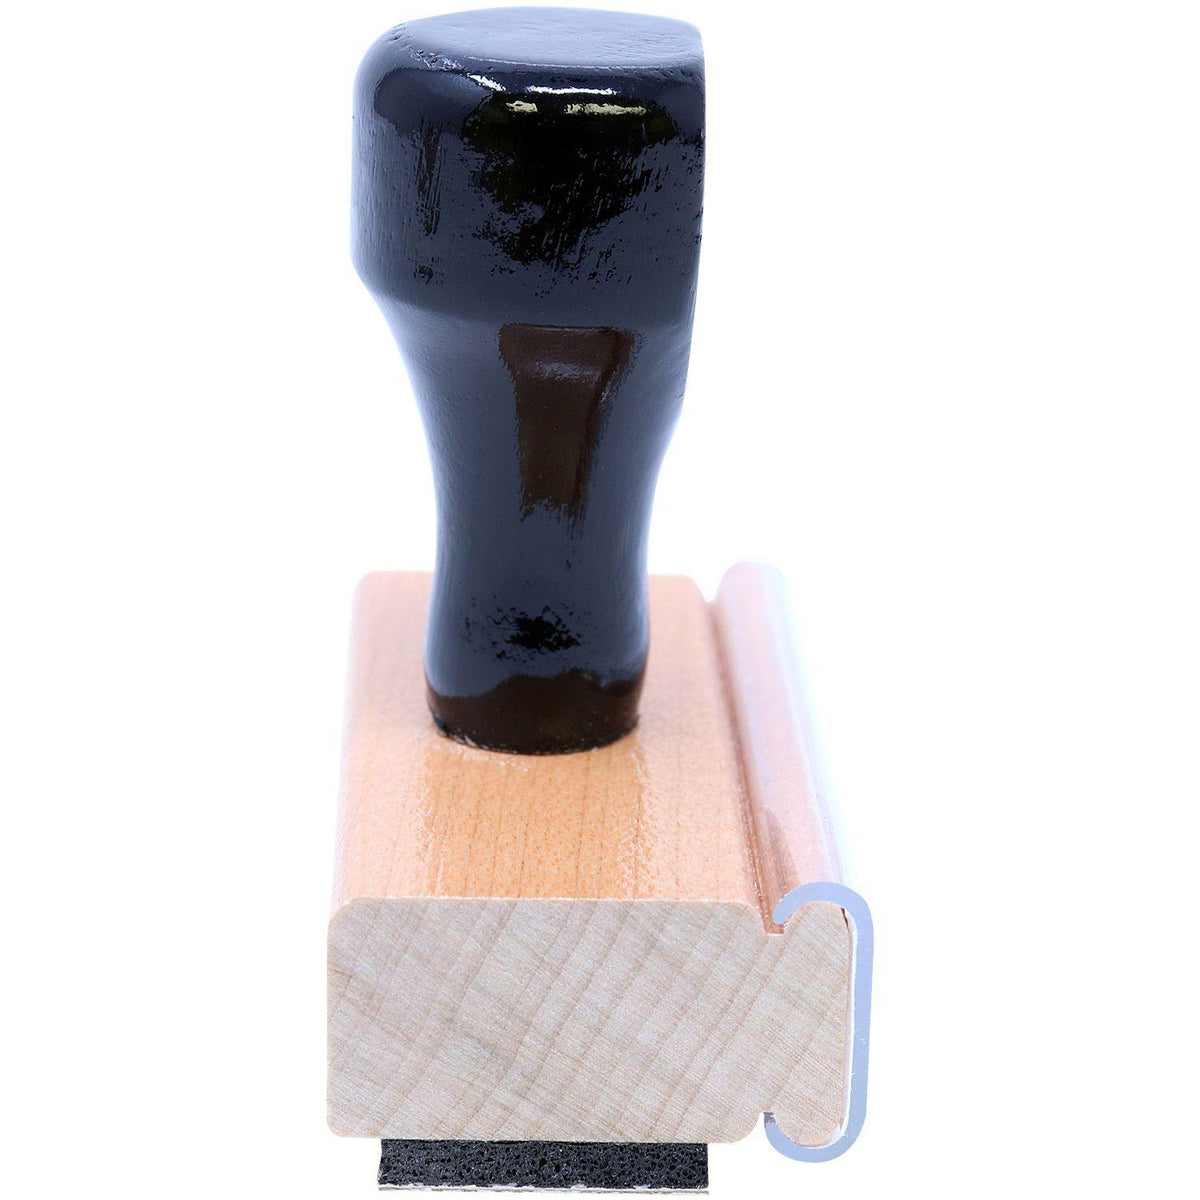 Side View of Large Despachado Rubber Stamp Alt 1